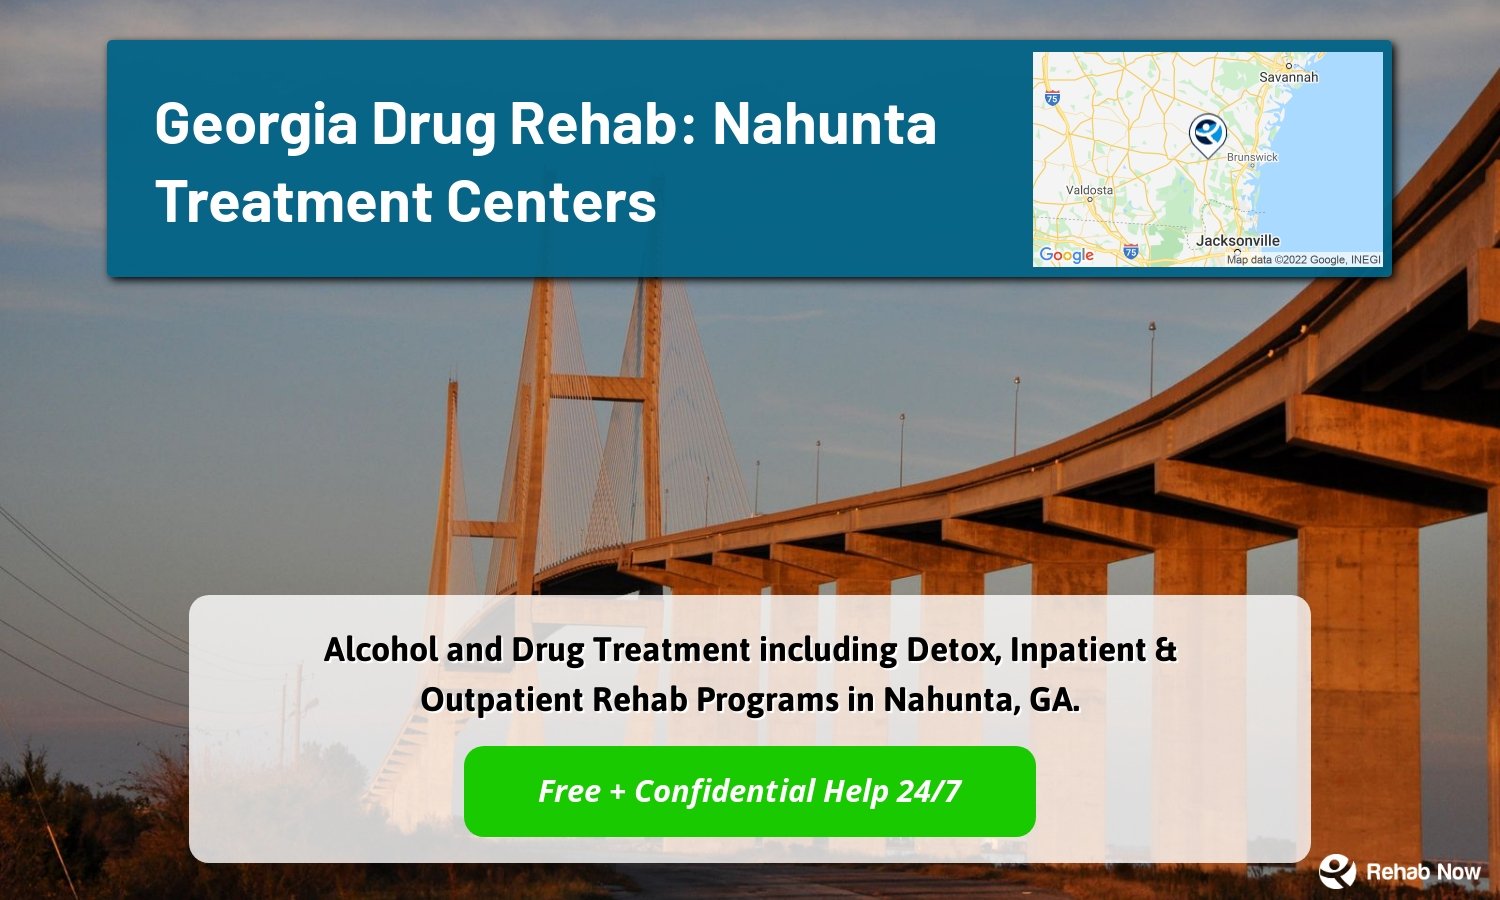 Alcohol and Drug Treatment including Detox, Inpatient & Outpatient Rehab Programs in Nahunta, GA.